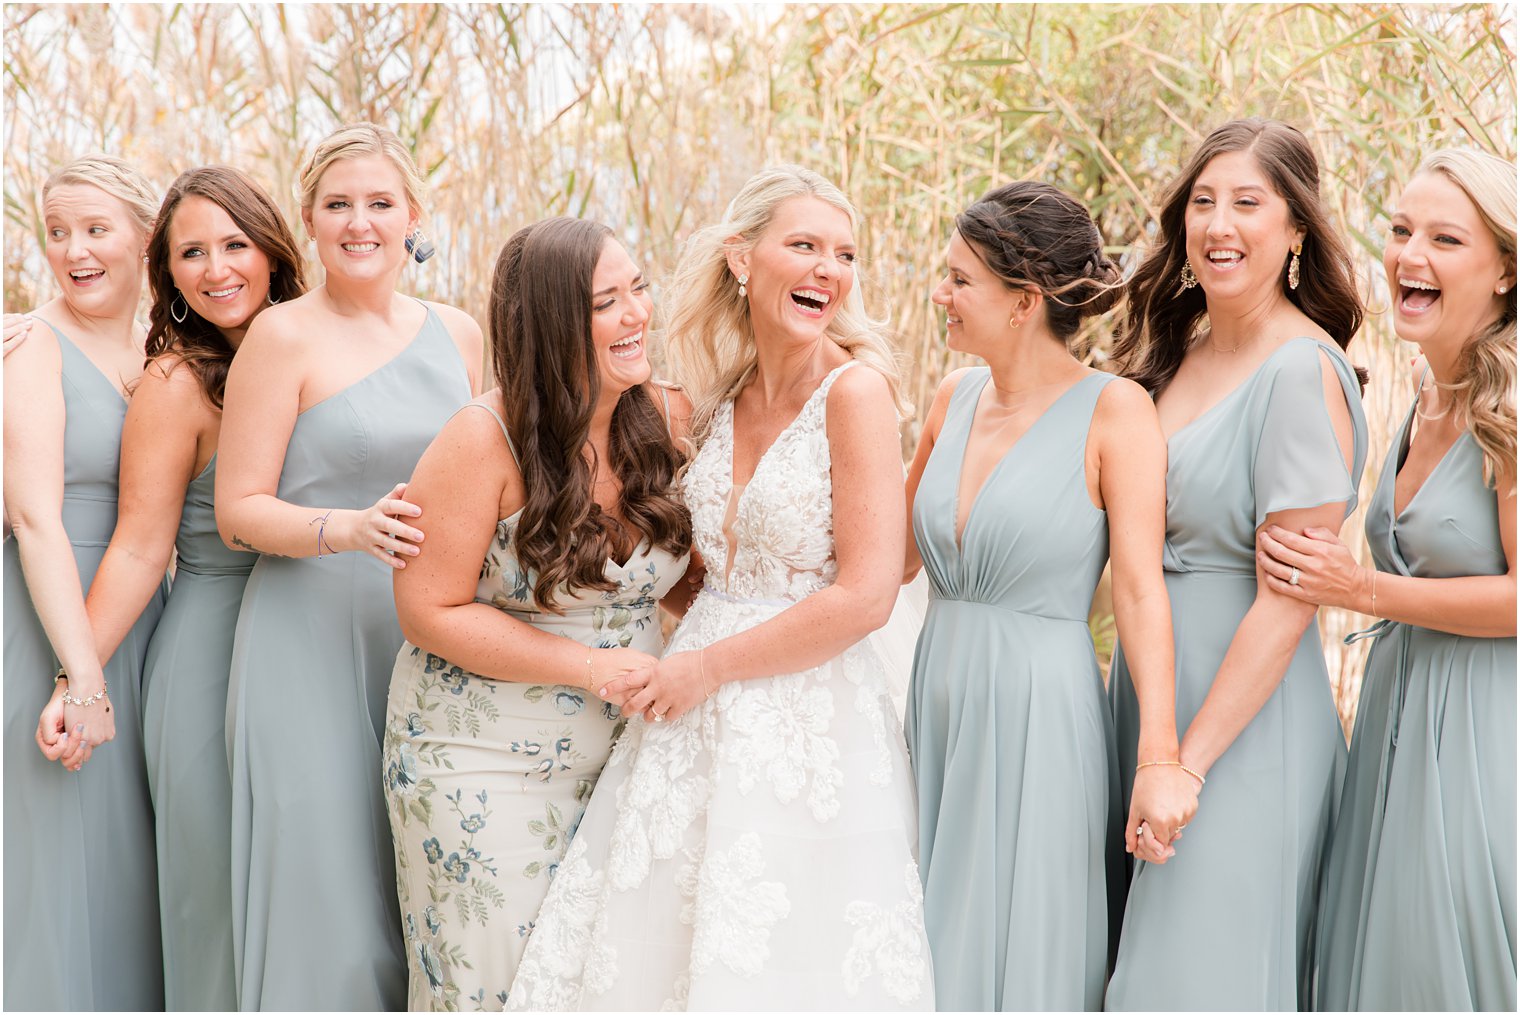 bride and bridesmaids laugh on beach before wedding day 